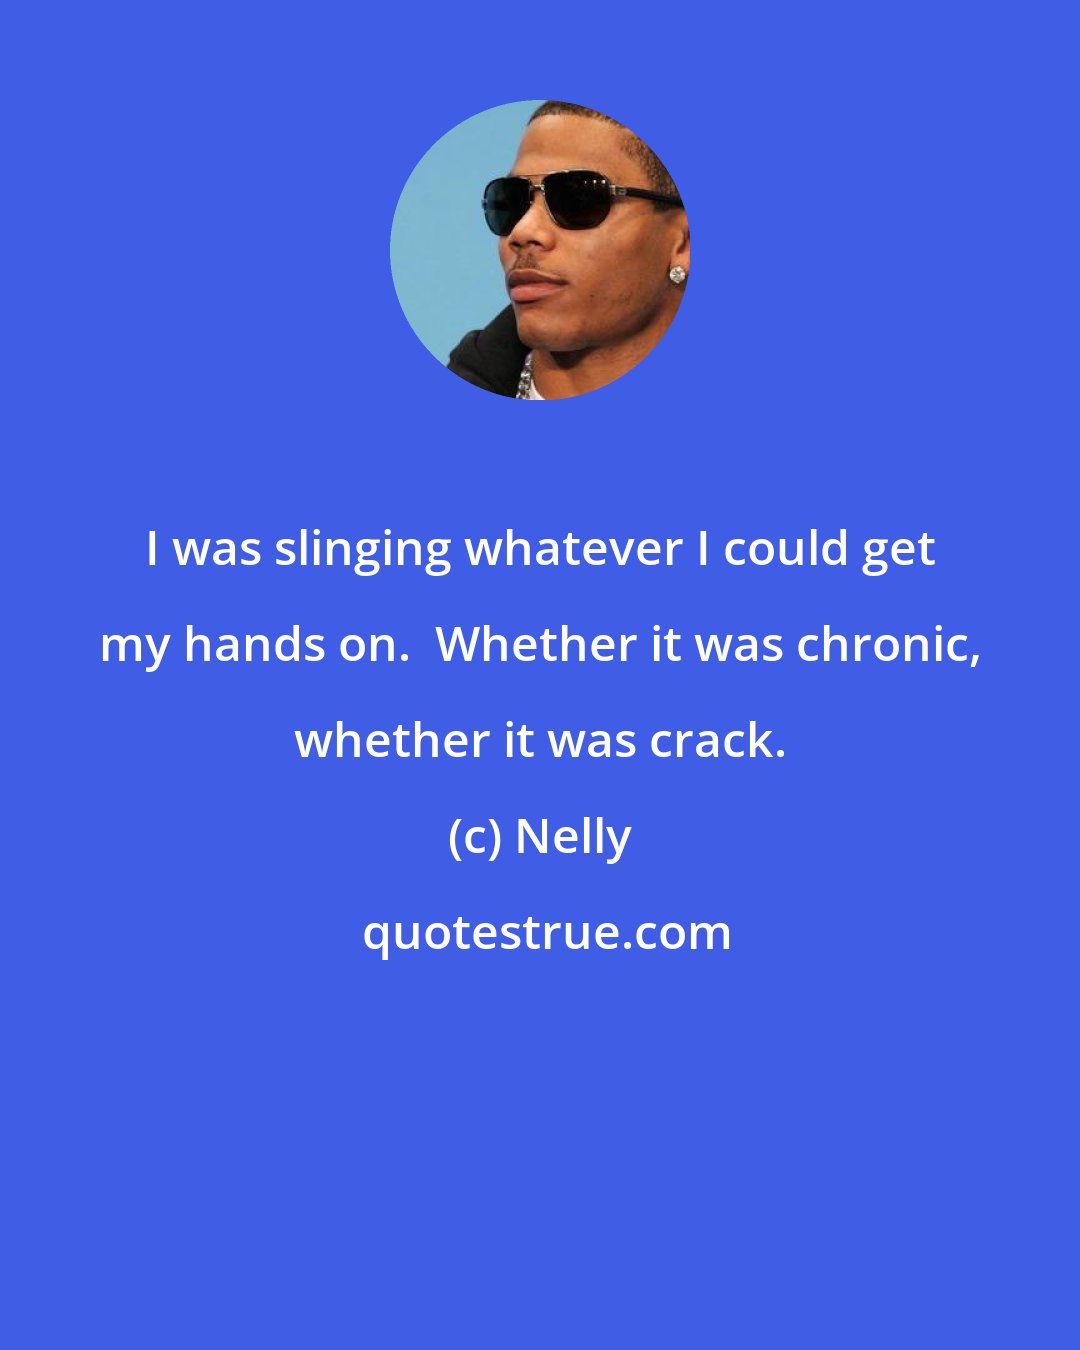 Nelly: I was slinging whatever I could get my hands on.  Whether it was chronic, whether it was crack.